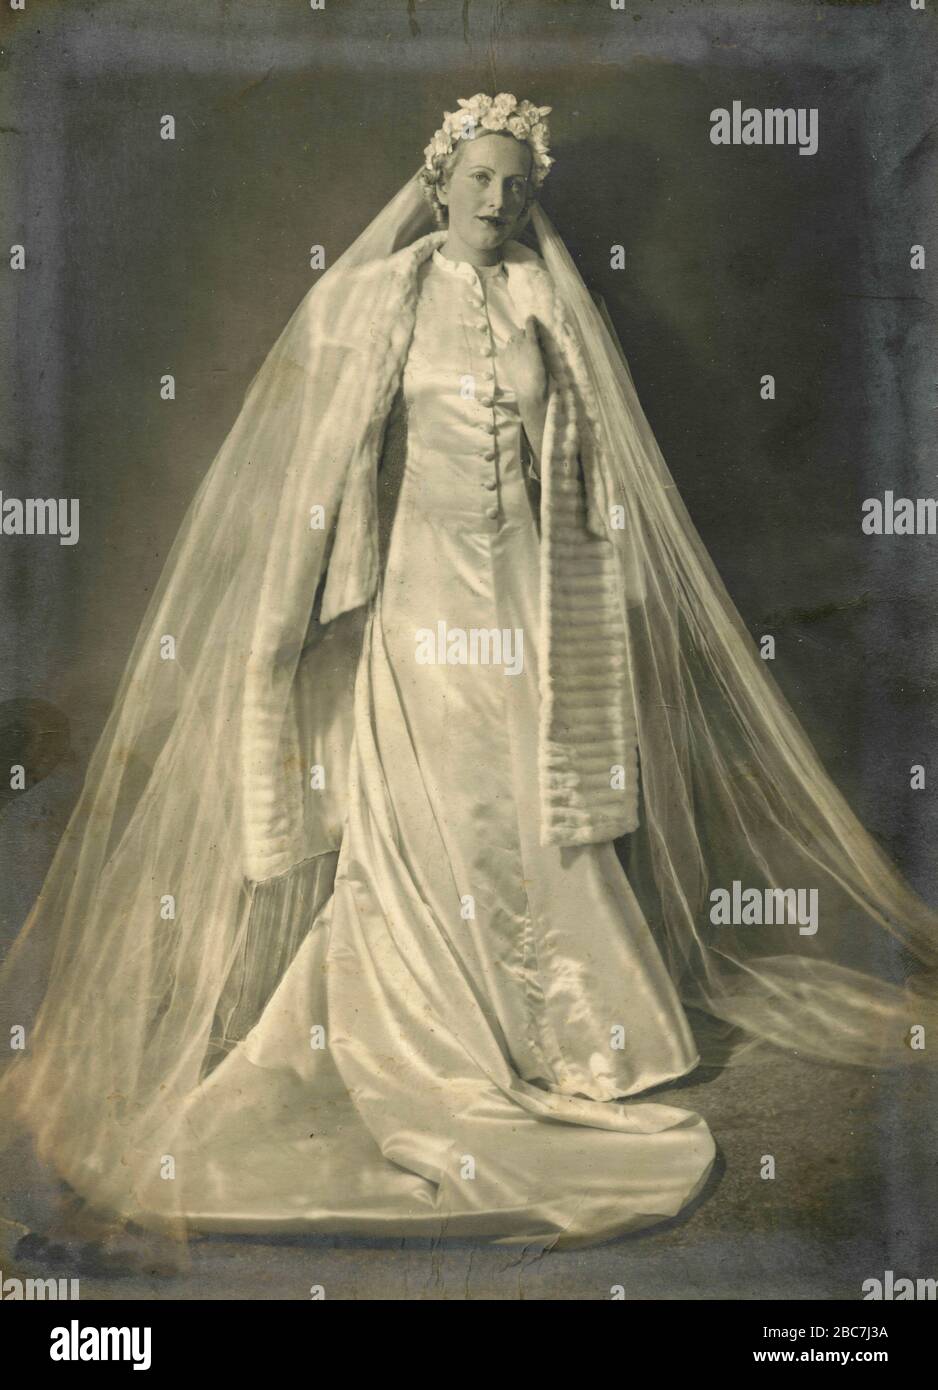 Bride with long wedding dress and white fur, Italy 1930s Stock Photo